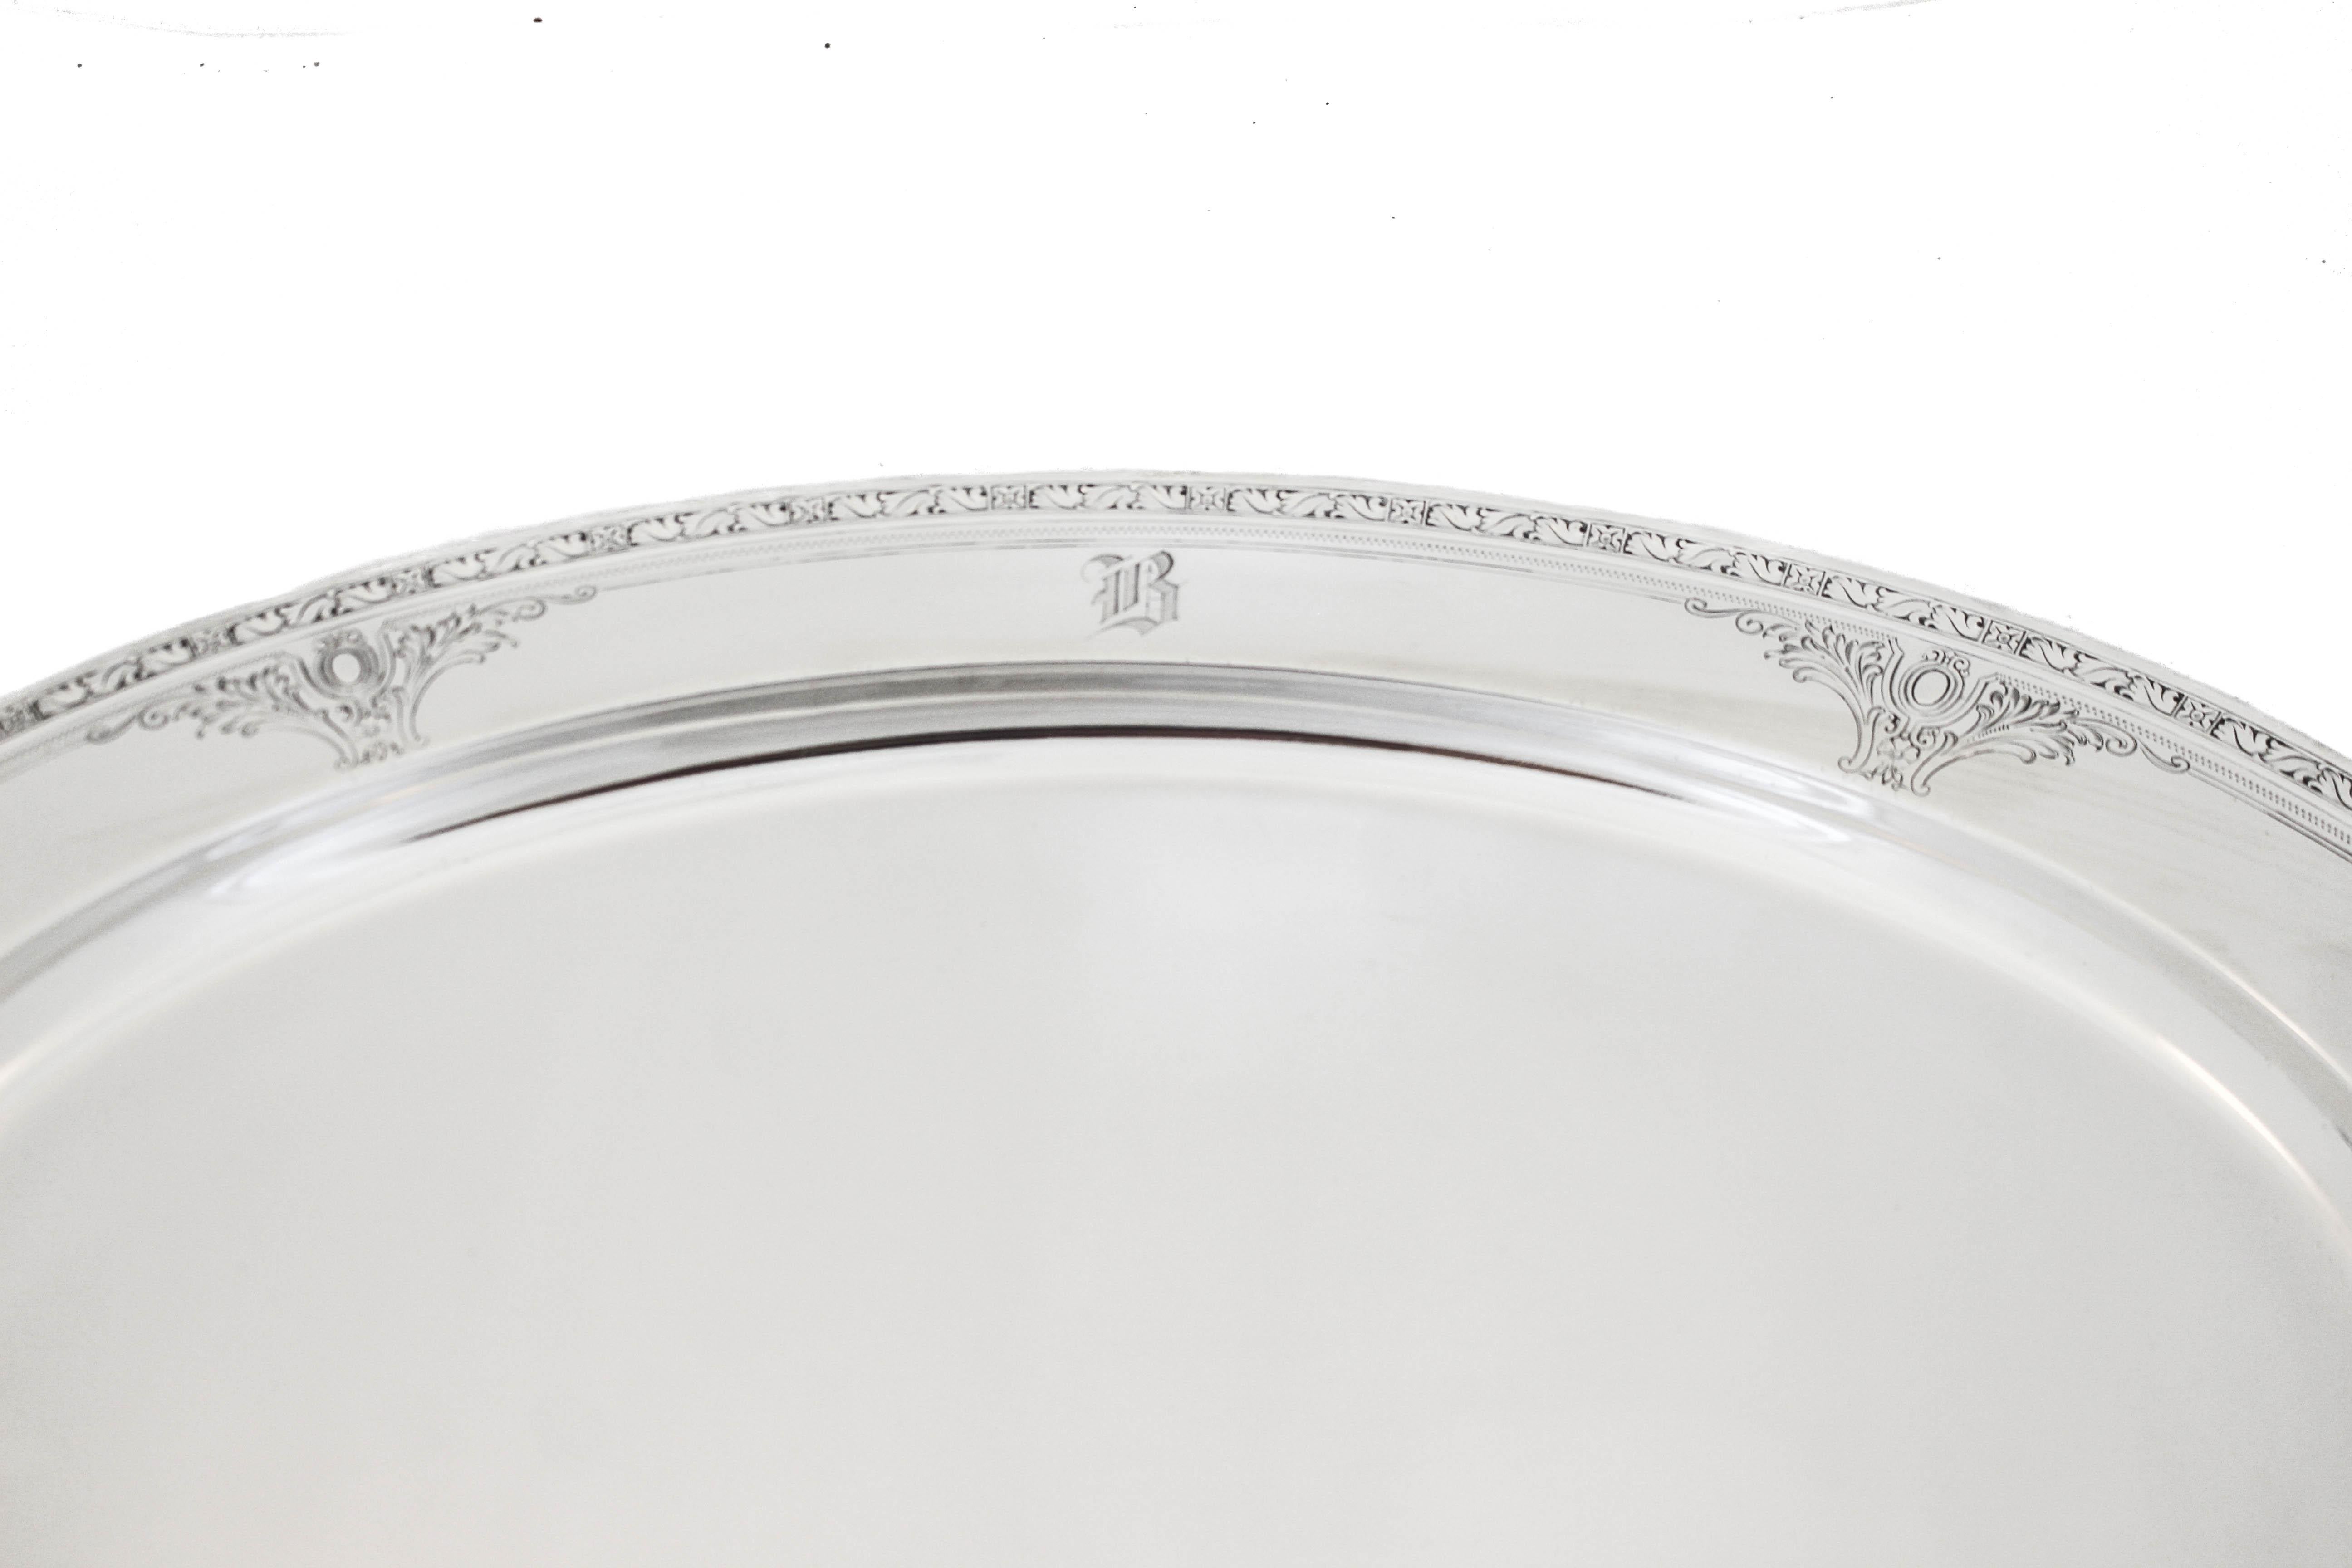 Being offered is a sterling silver platter by Gorham Silver in the “Cinderella” pattern hallmarked 1925.  It has a lovely etched pattern around the edge (2”) with four medallions — two on each side.  The center is completely flat so it’s ideal for